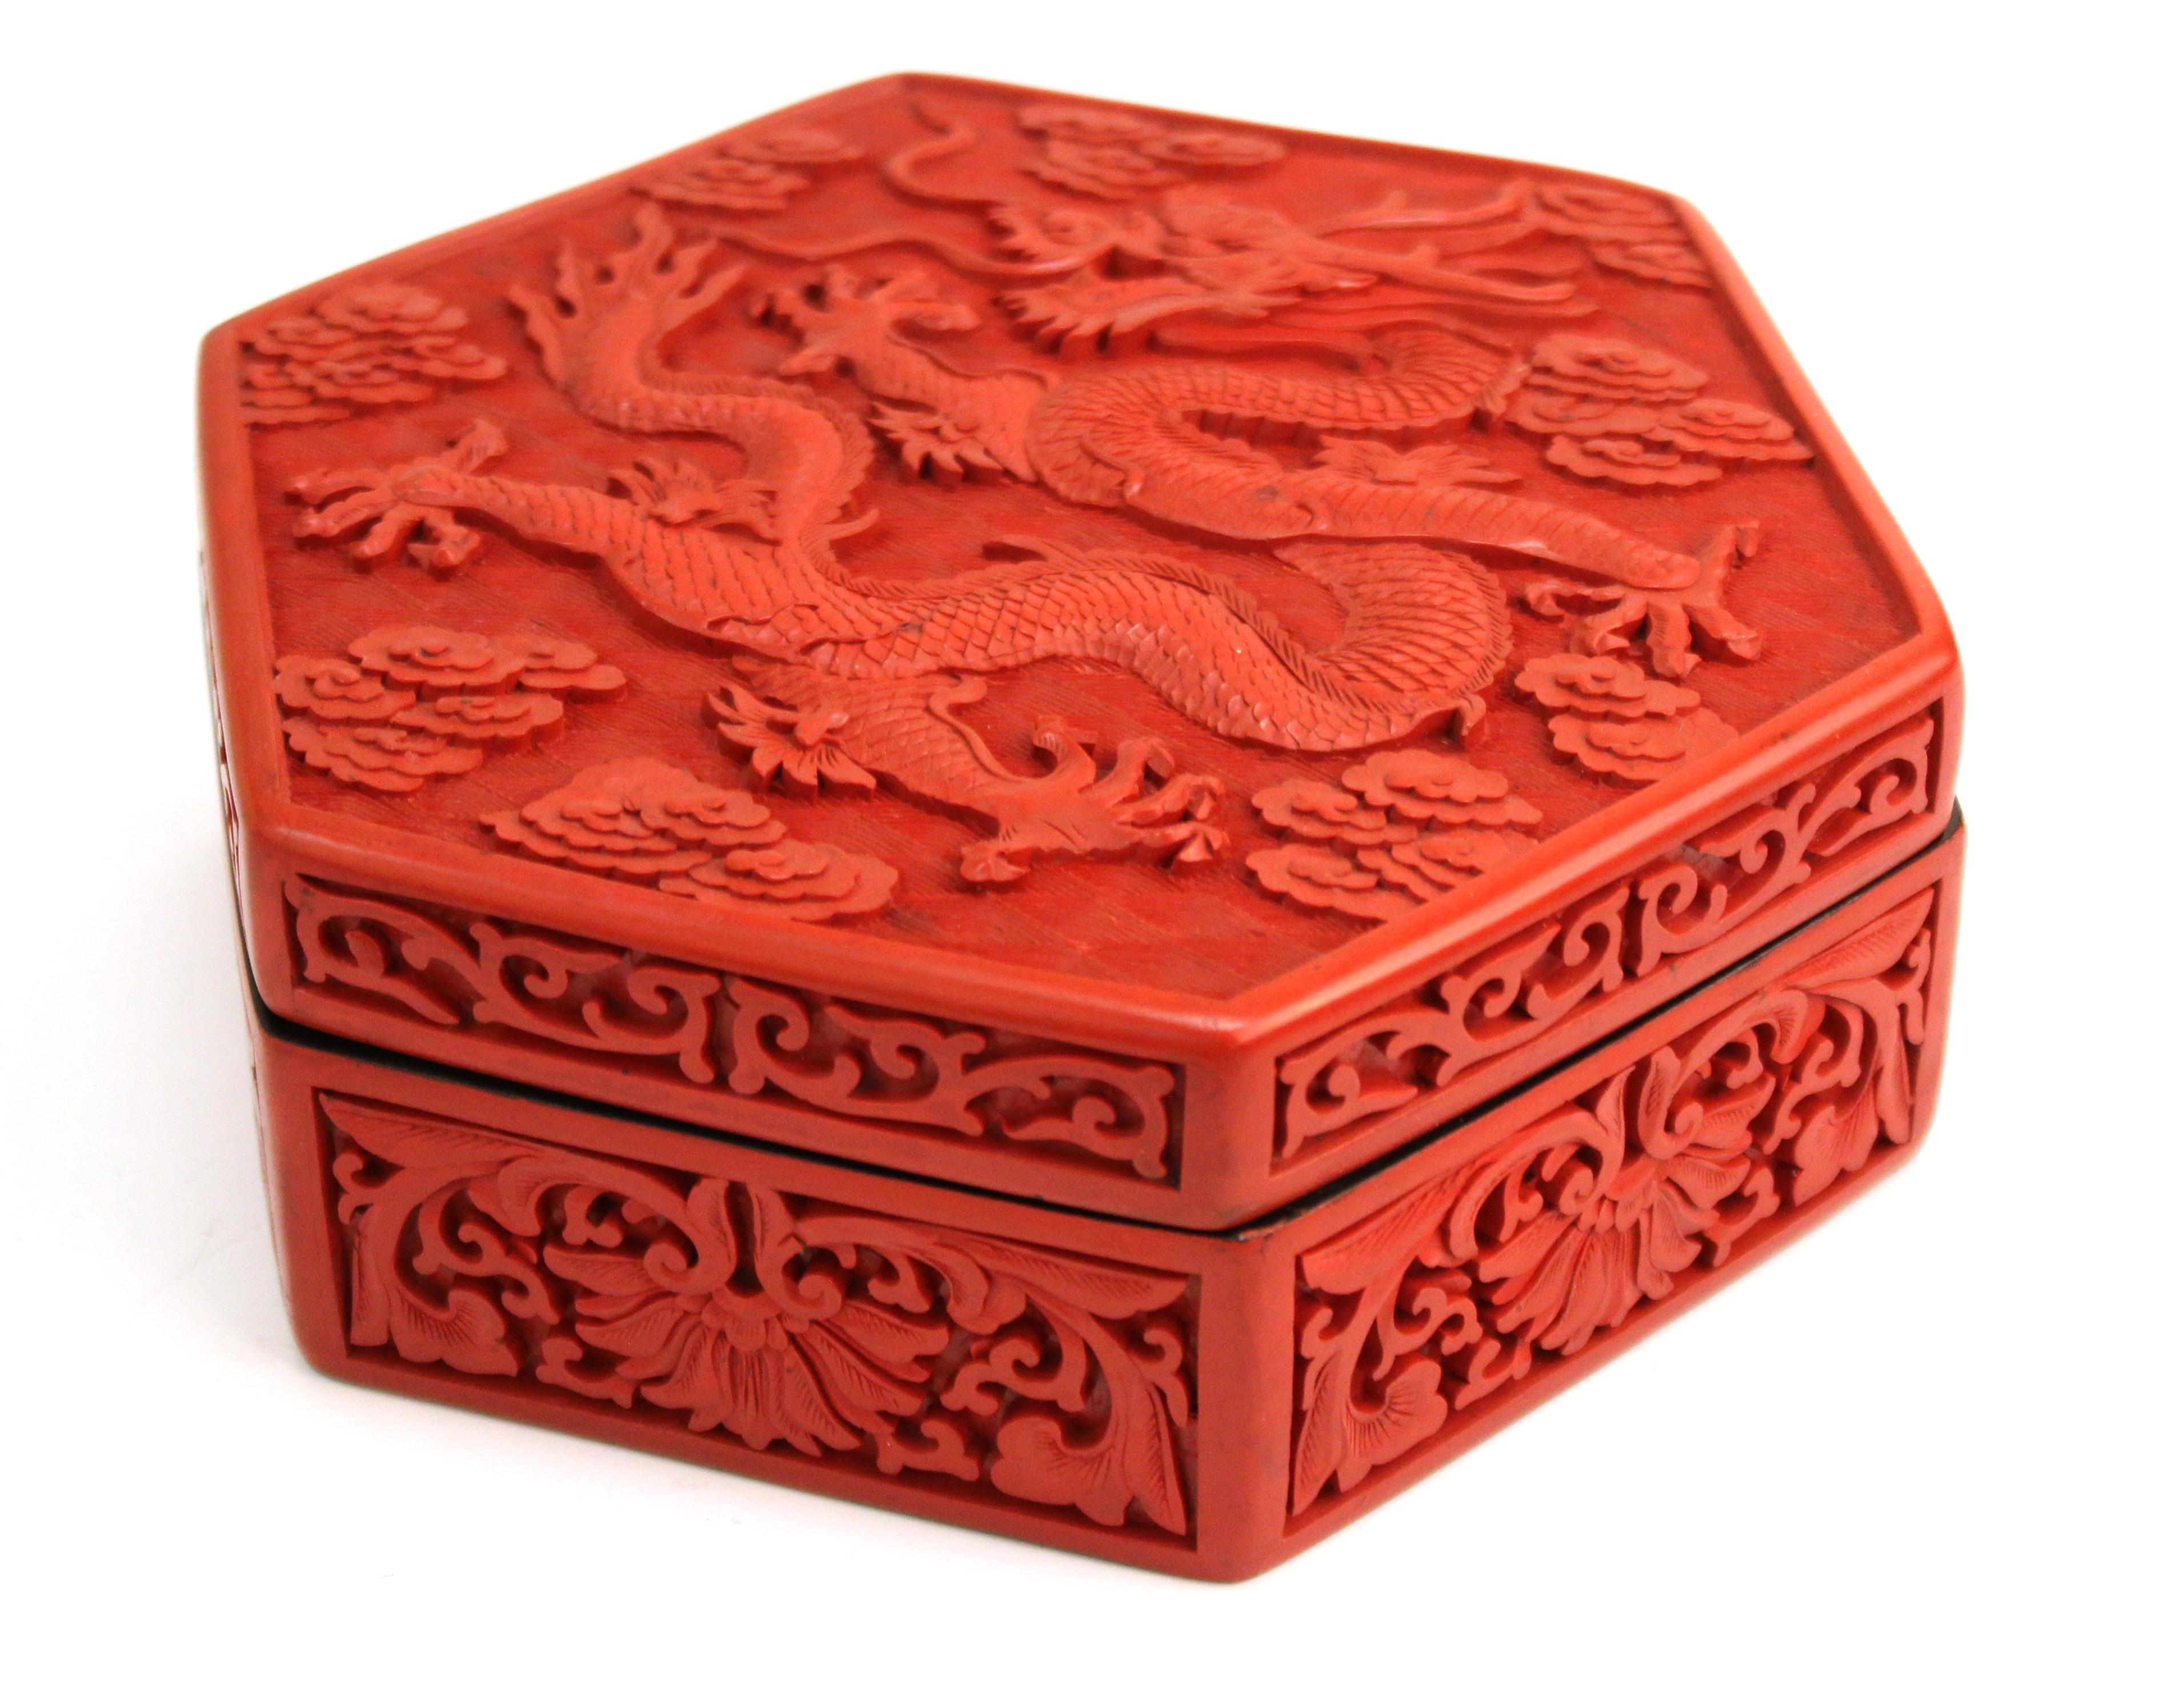 Chinese Export Chinese Cinnabar Box with Dragon Motif